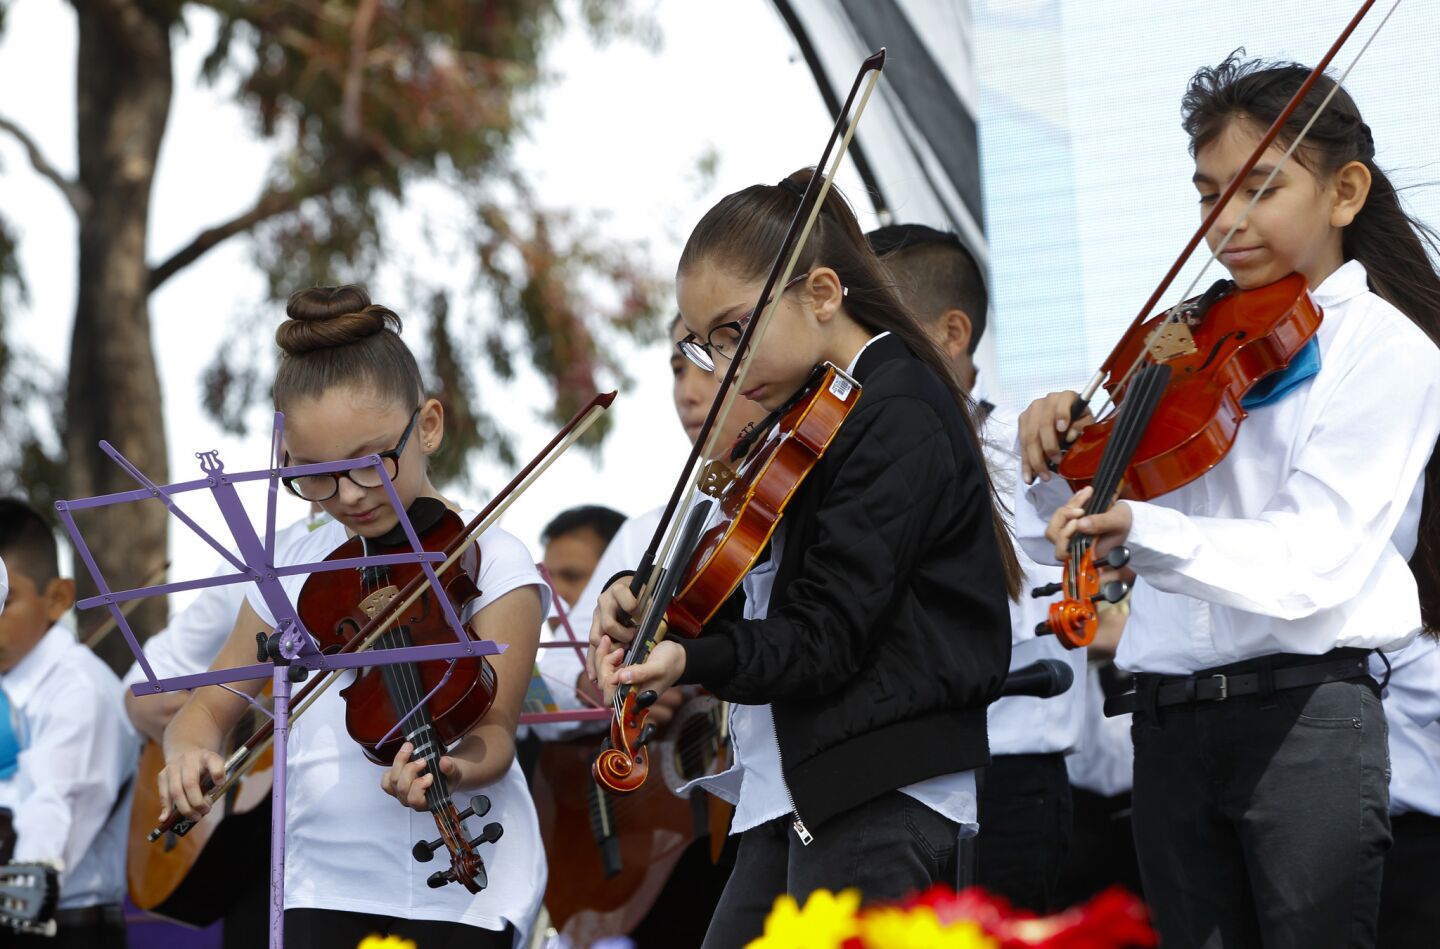 Students from the National City School District, grades 1 through 8, performed for the crowd at the annual International Mariachi Festival in National City.